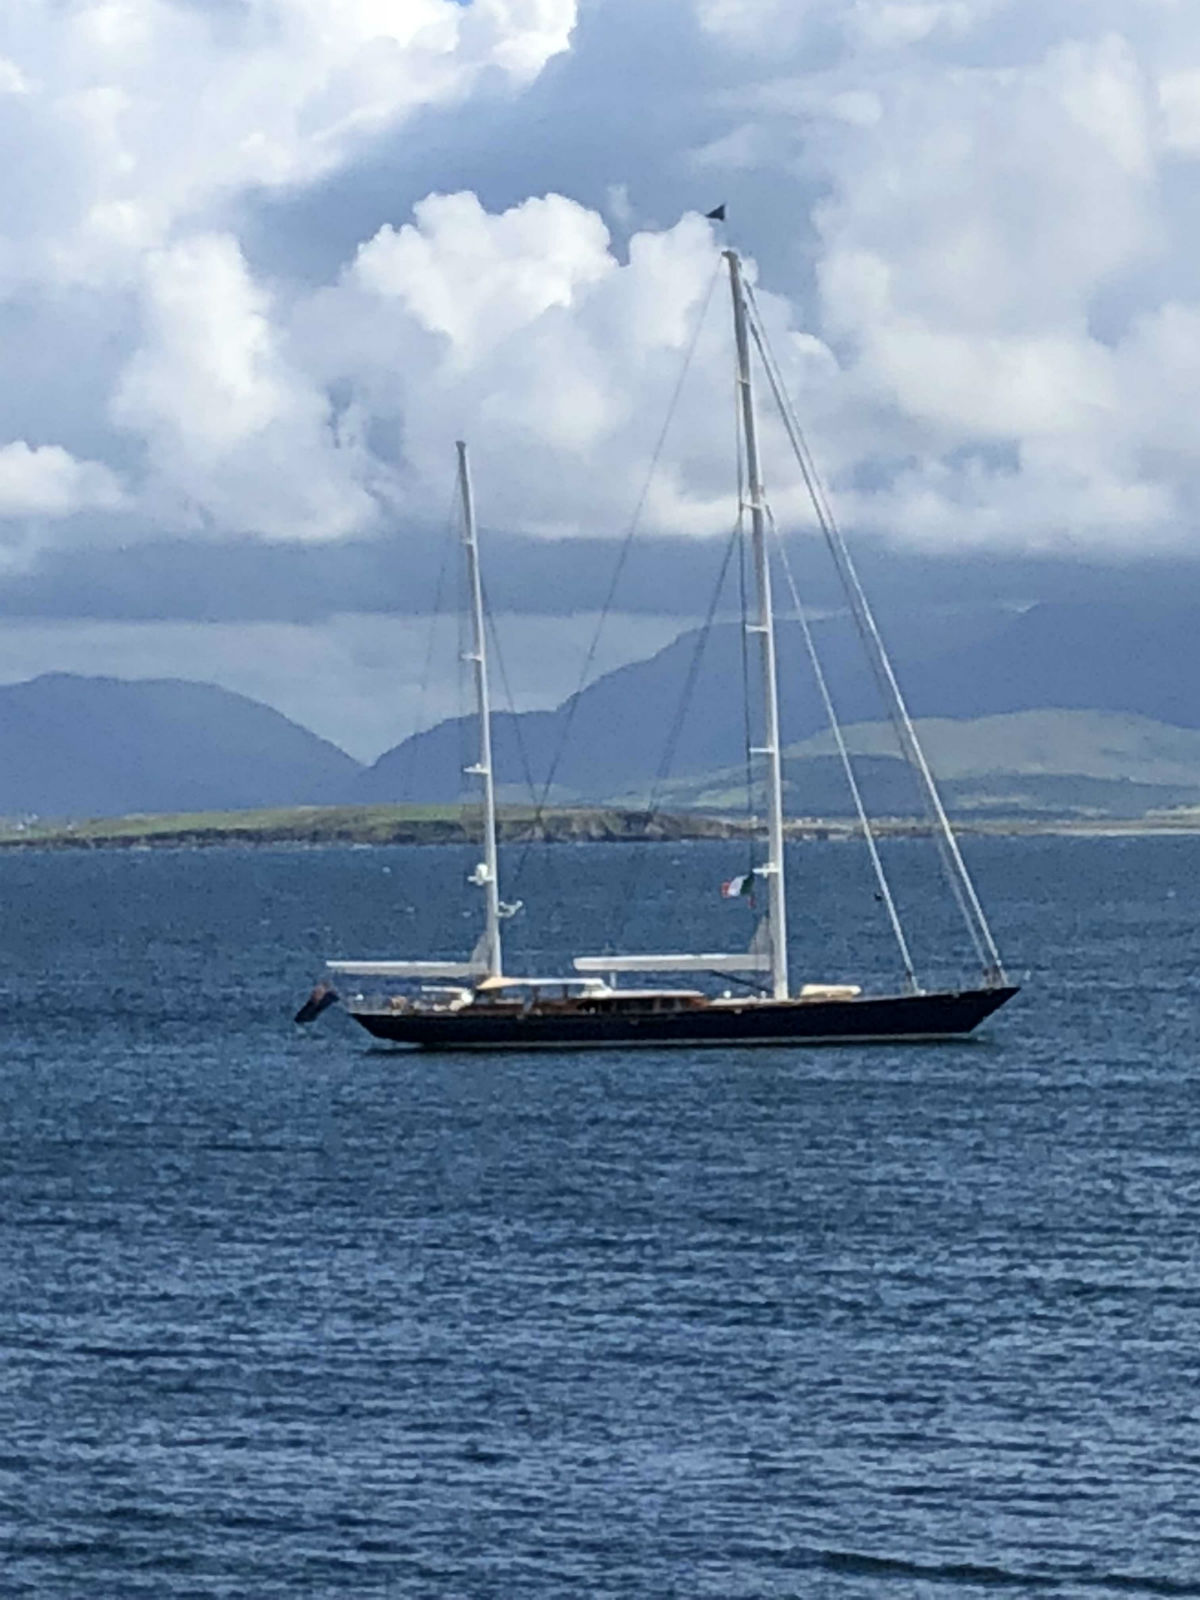 Sailing Yacht Christopher off Claire Island, coast of Ireland